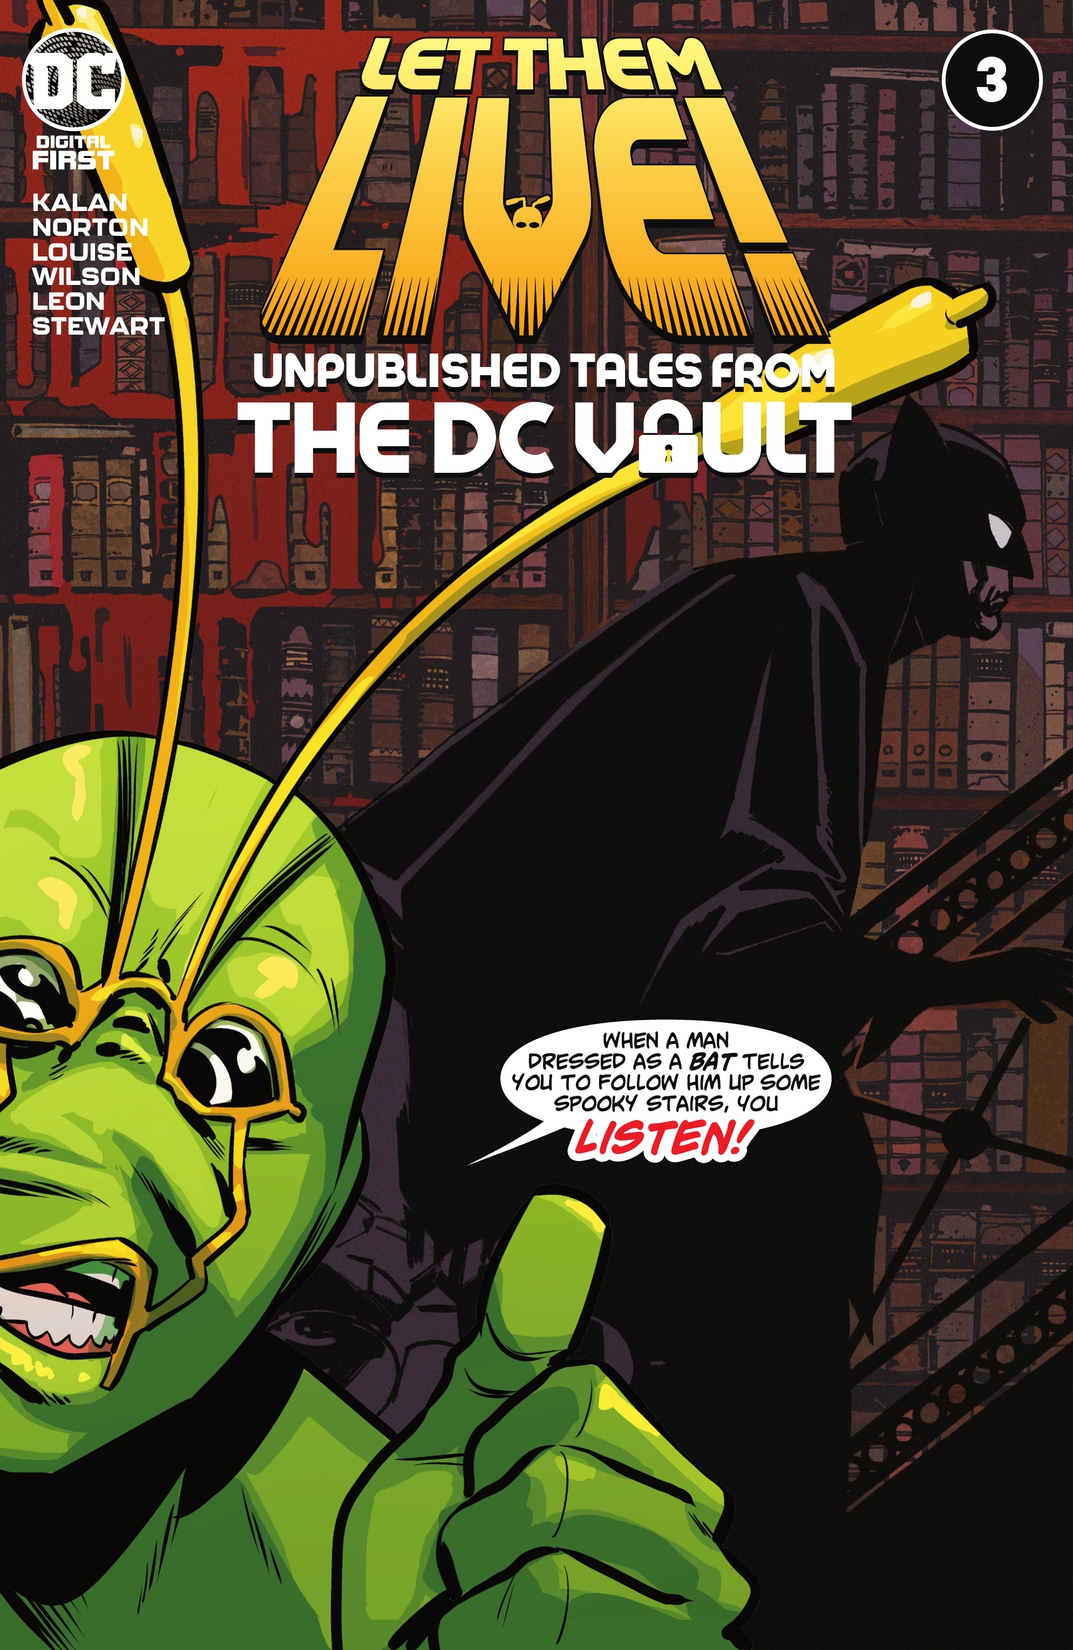 Let Them Live!: Unpublished Tales from the DC Vault #3 preview images